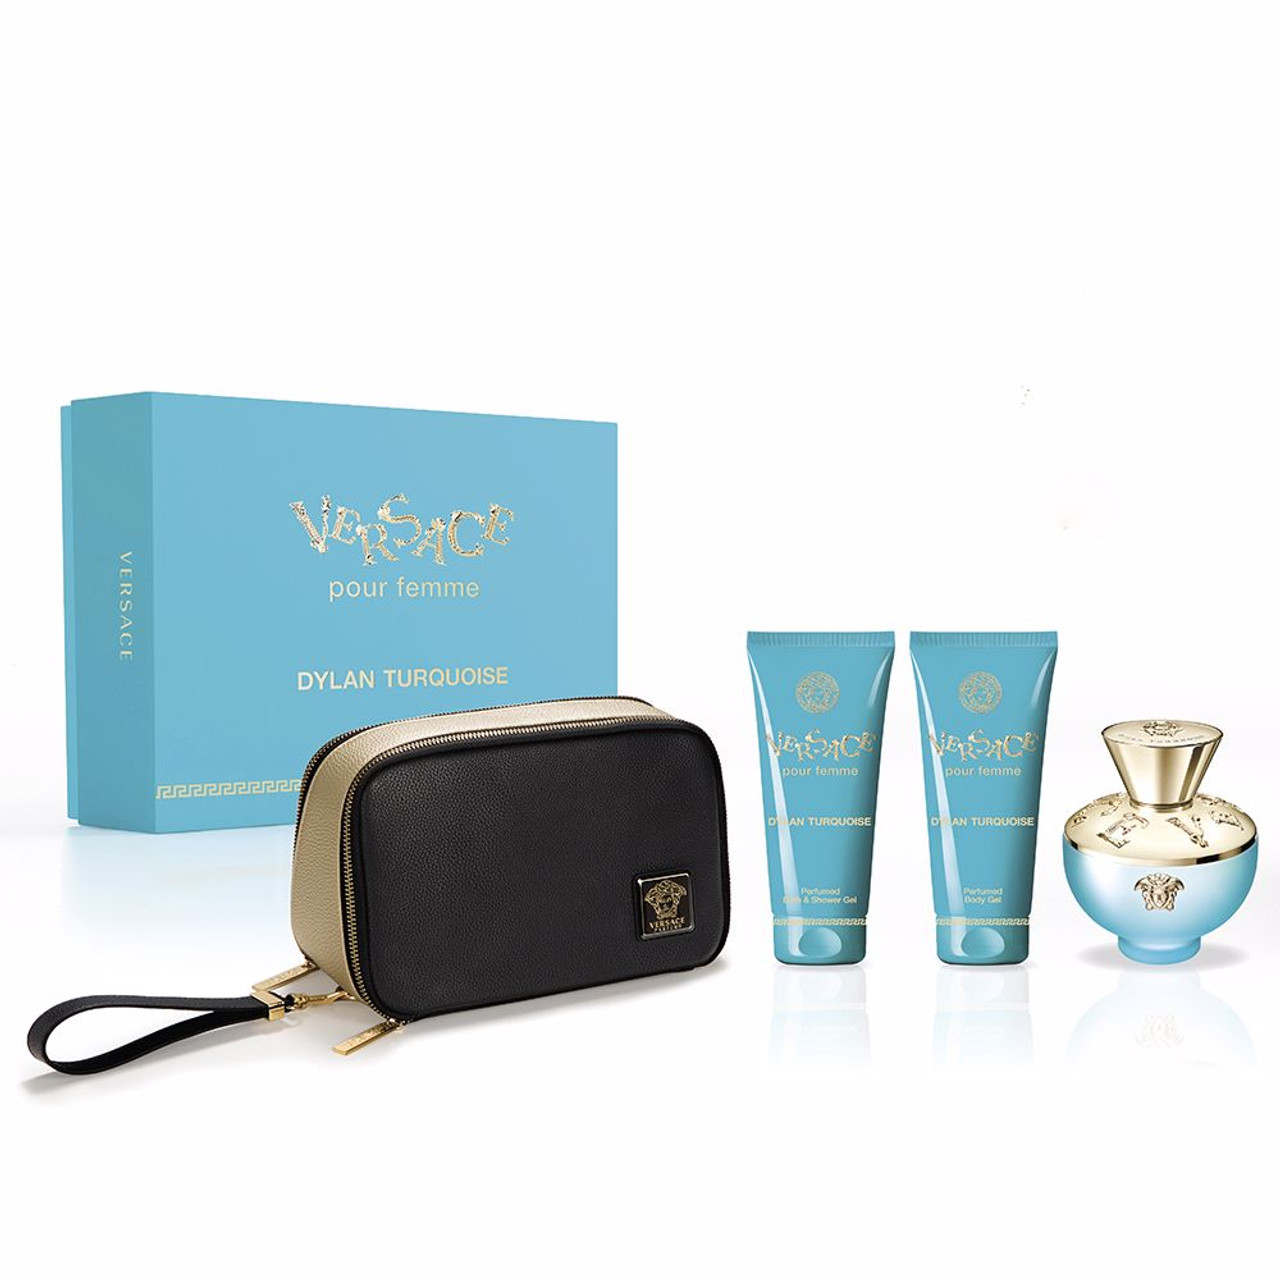 VERSACE DYLAN TURQUOISE 4PC GIFT SET - 3.4OZ EDT + 3.4OZ BODY LOTION + 3.4